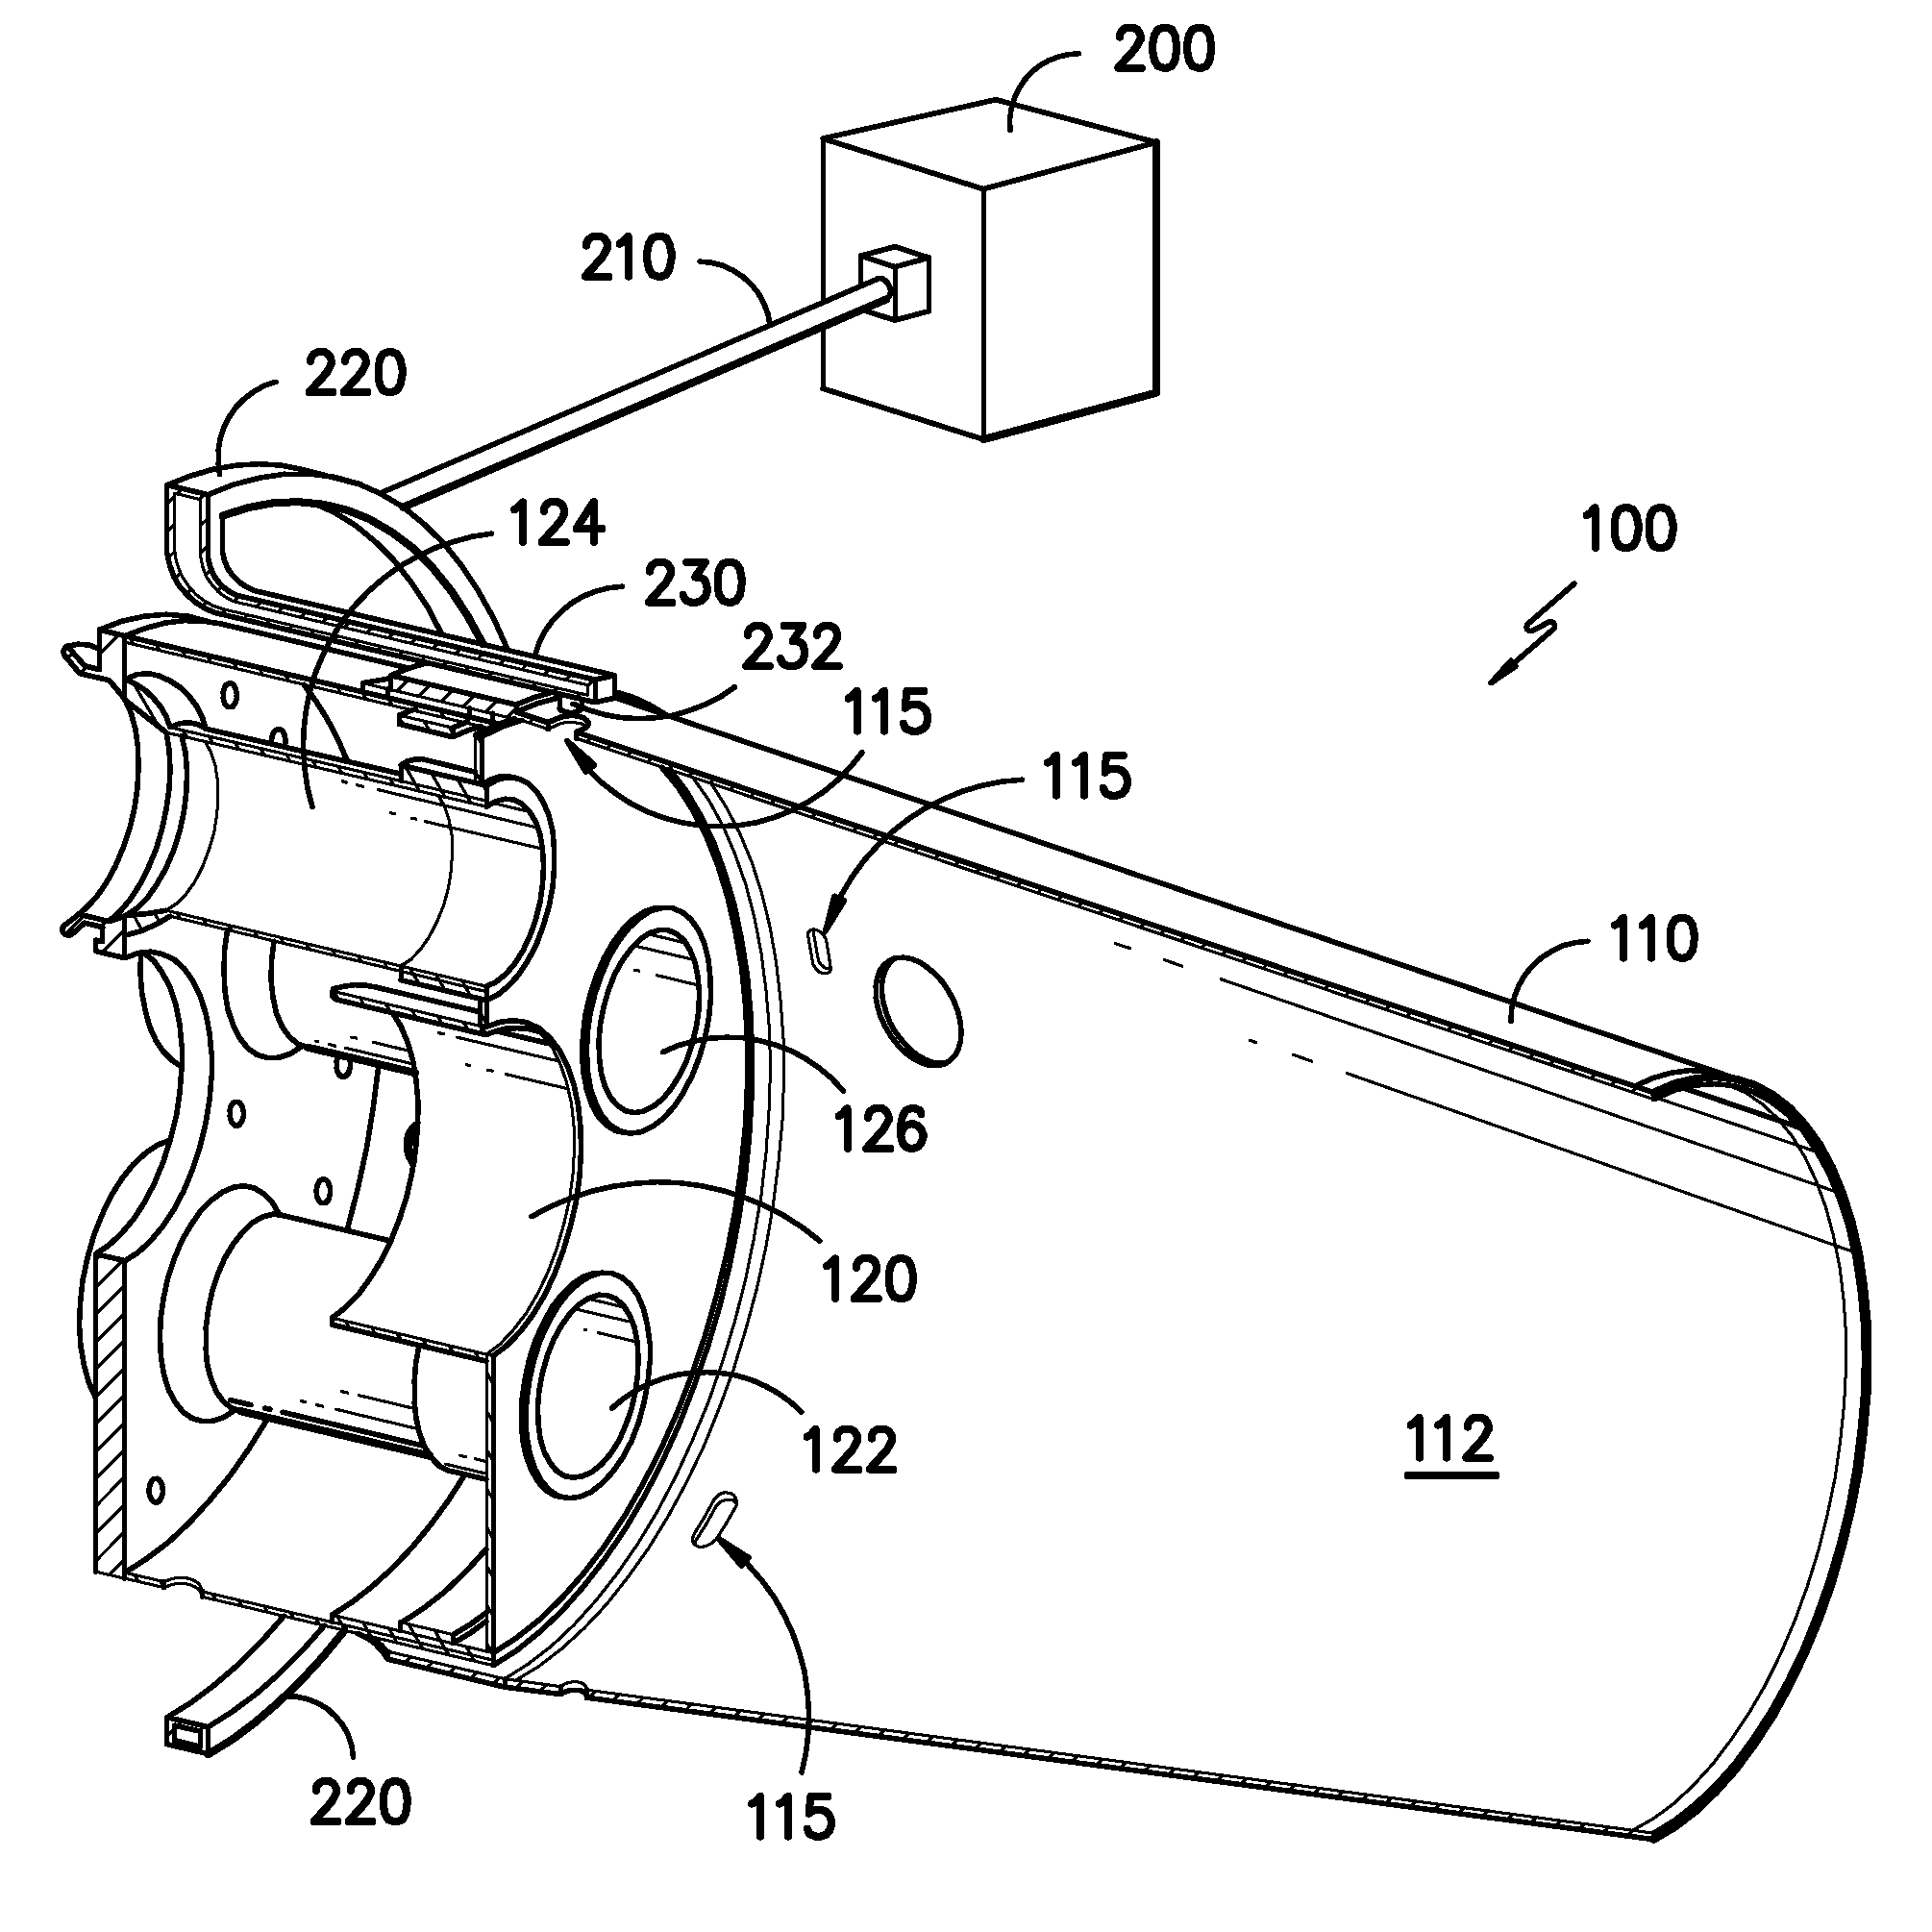 Apparatus for high-frequency electromagnetic initiation of a combustion process